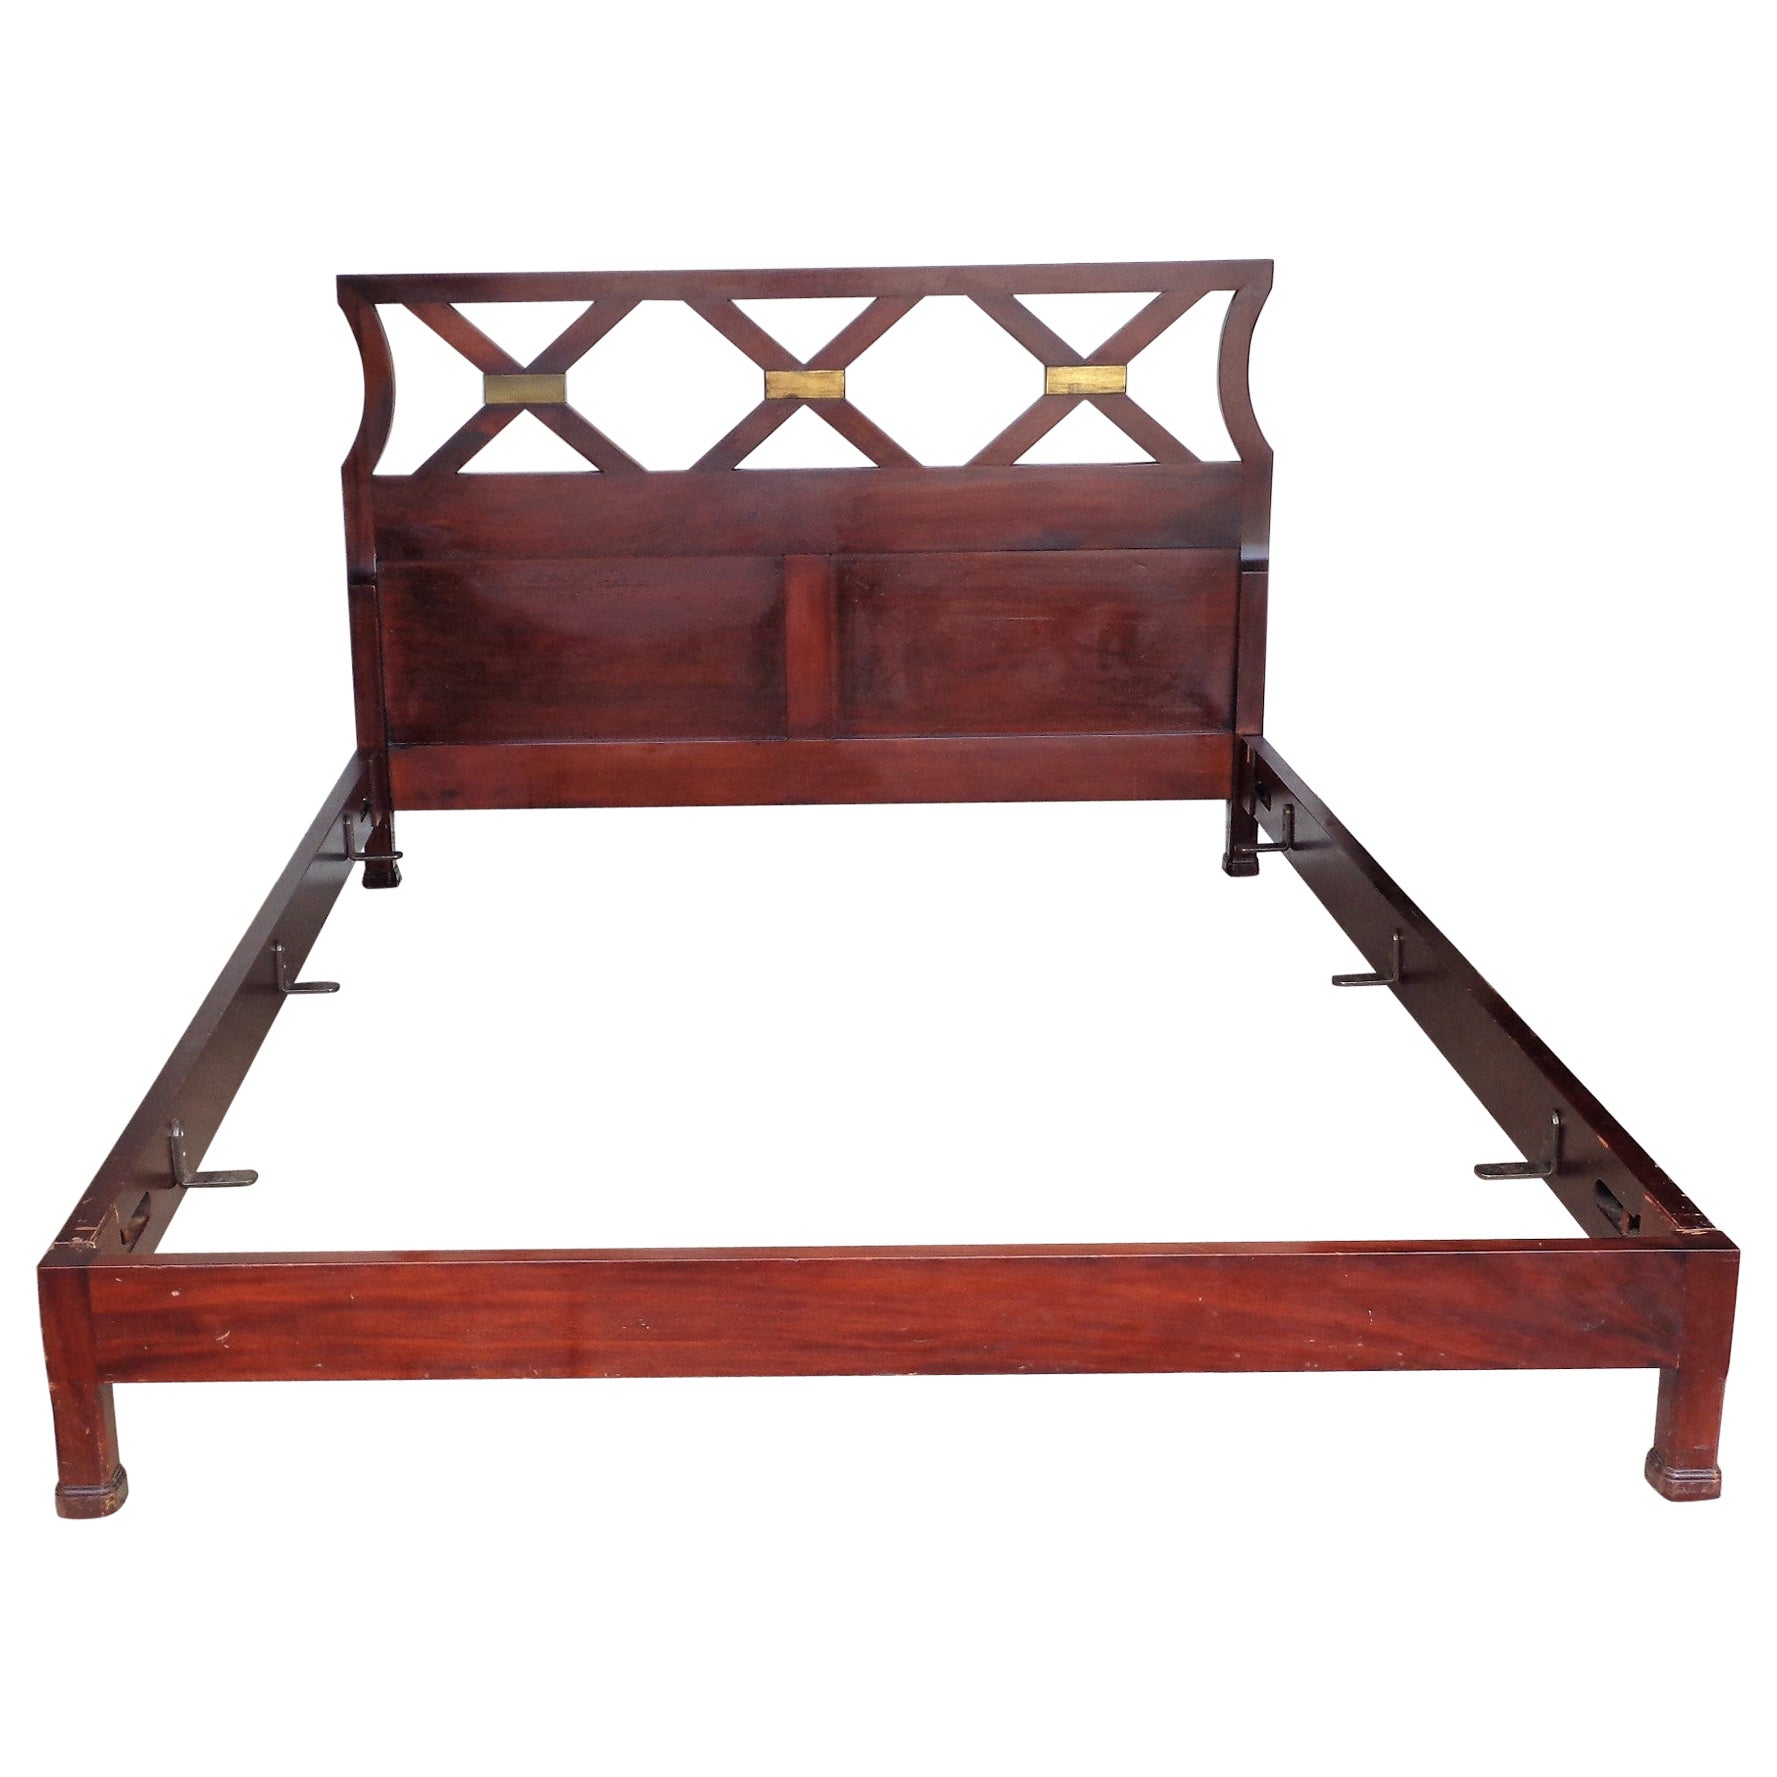 1940's Classical Mahogany Bed by Grosfeld House